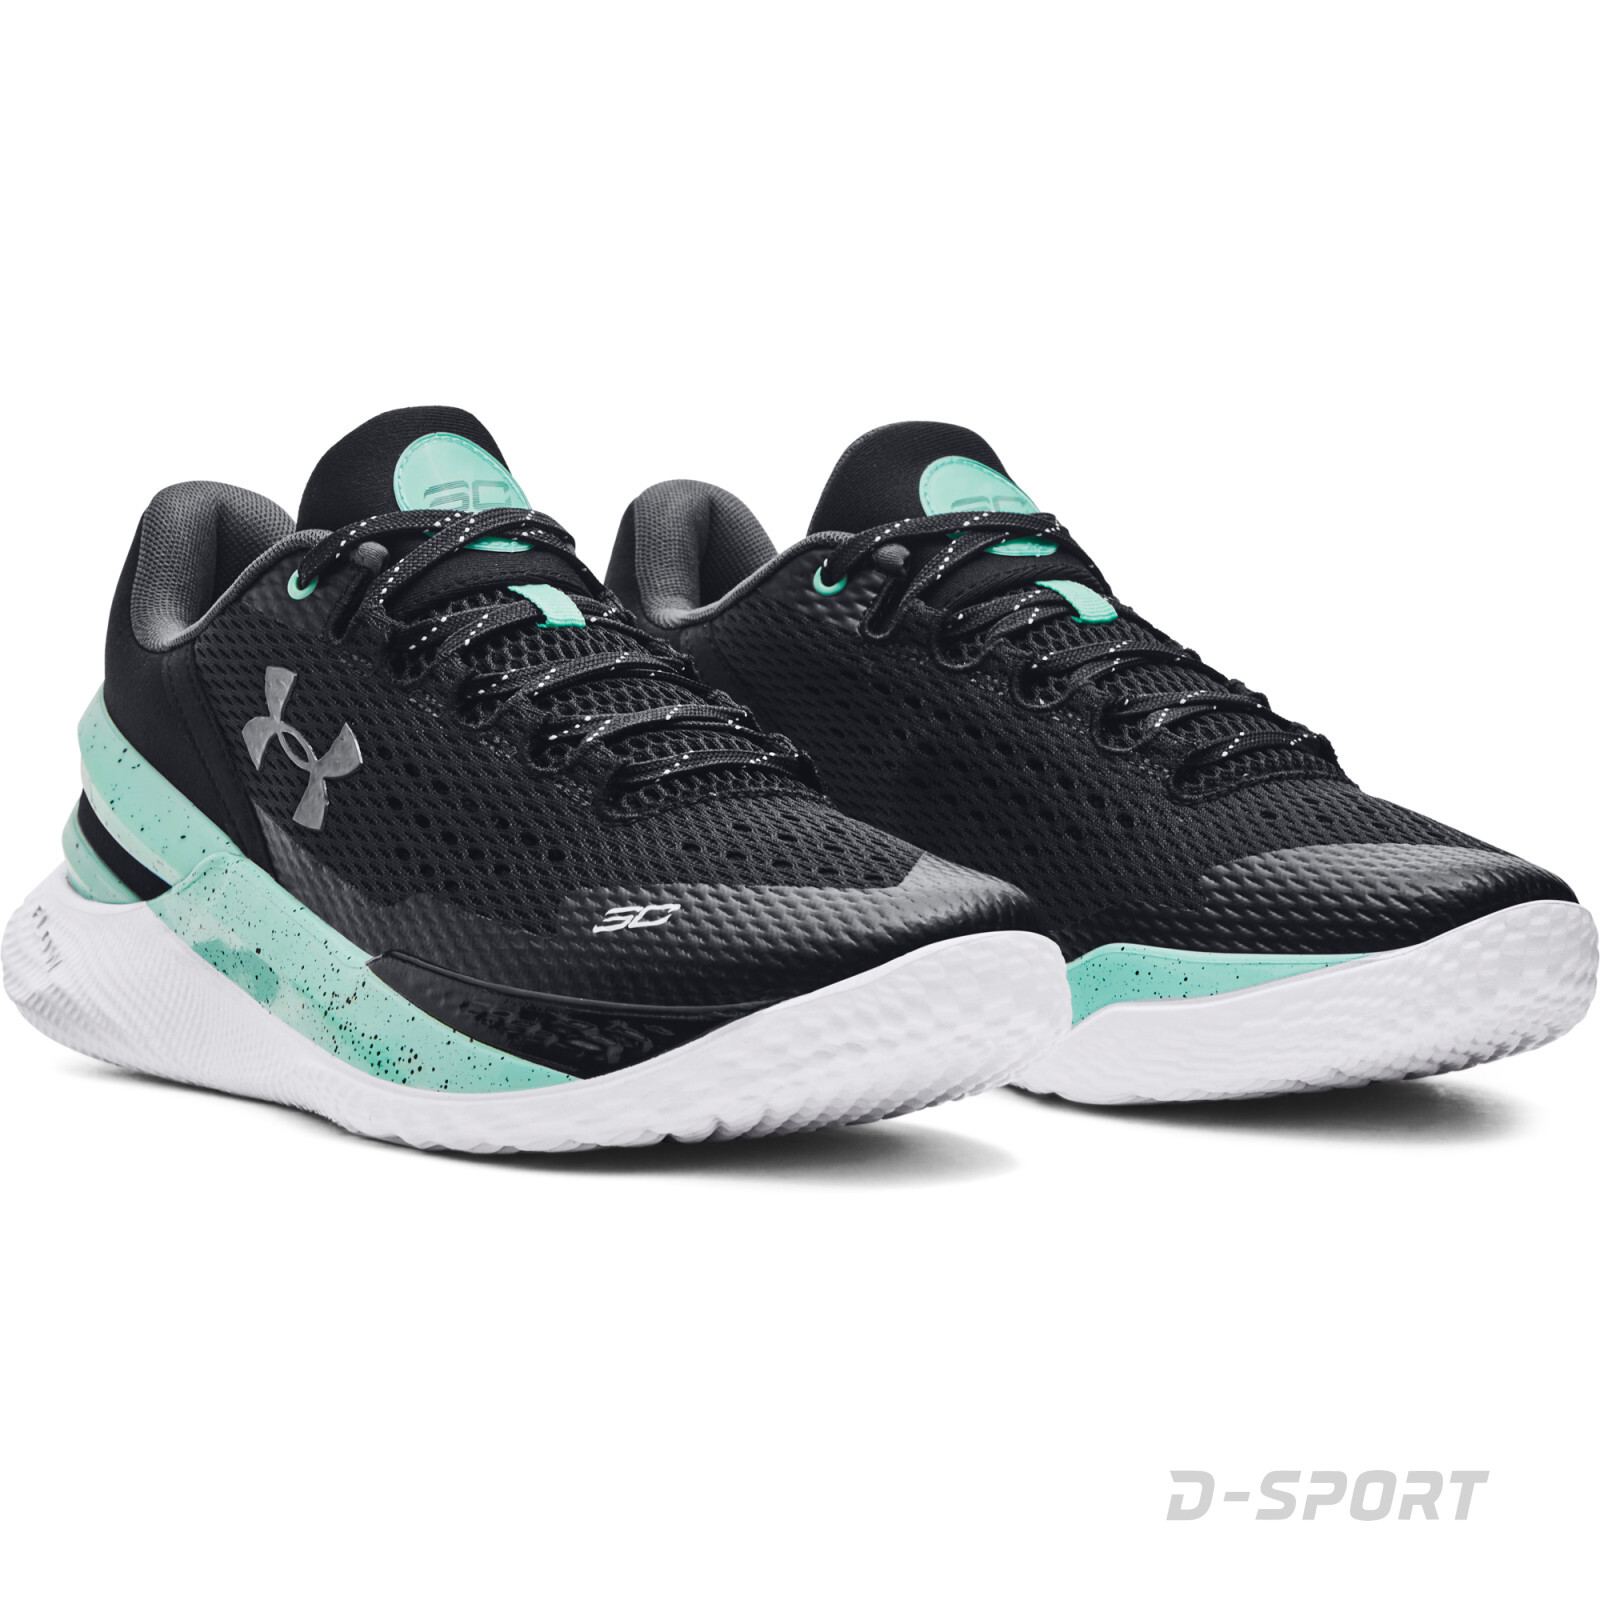 Under Armour CURRY 2 LOW FLOTRO